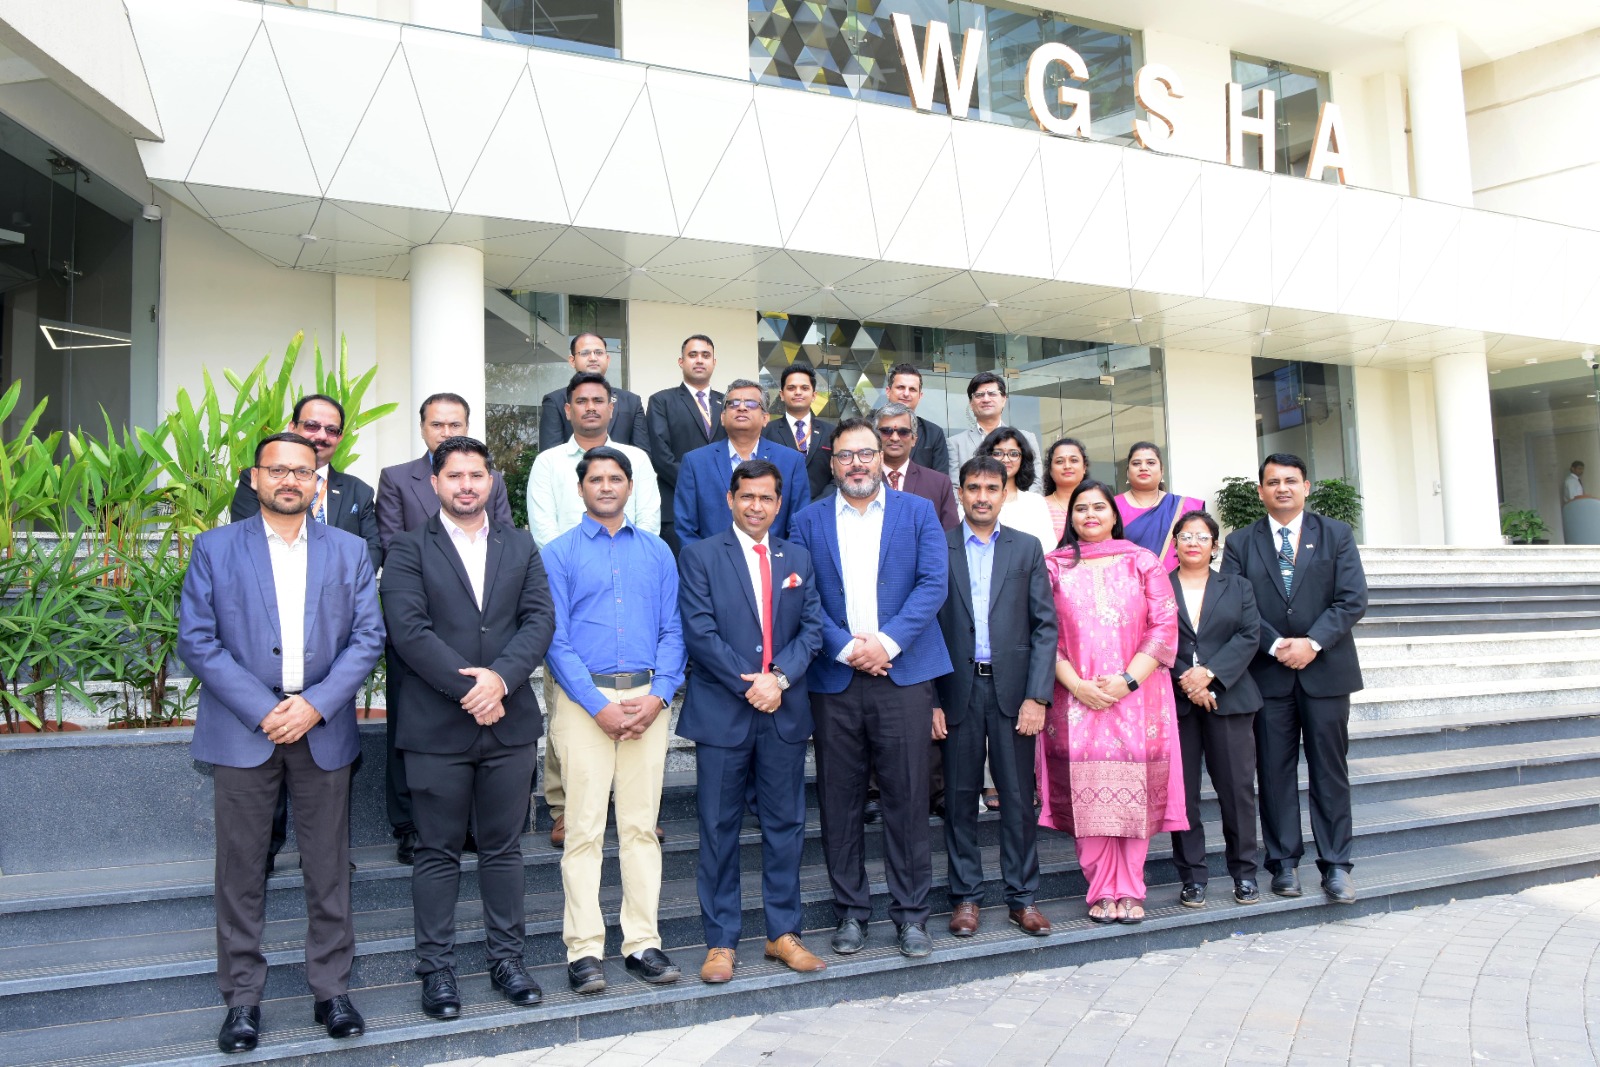 Welcomgroup Graduate School of Hotel Administration (WGSHA) partners with ITC Infotech to enhance understanding of Front Desk Operations